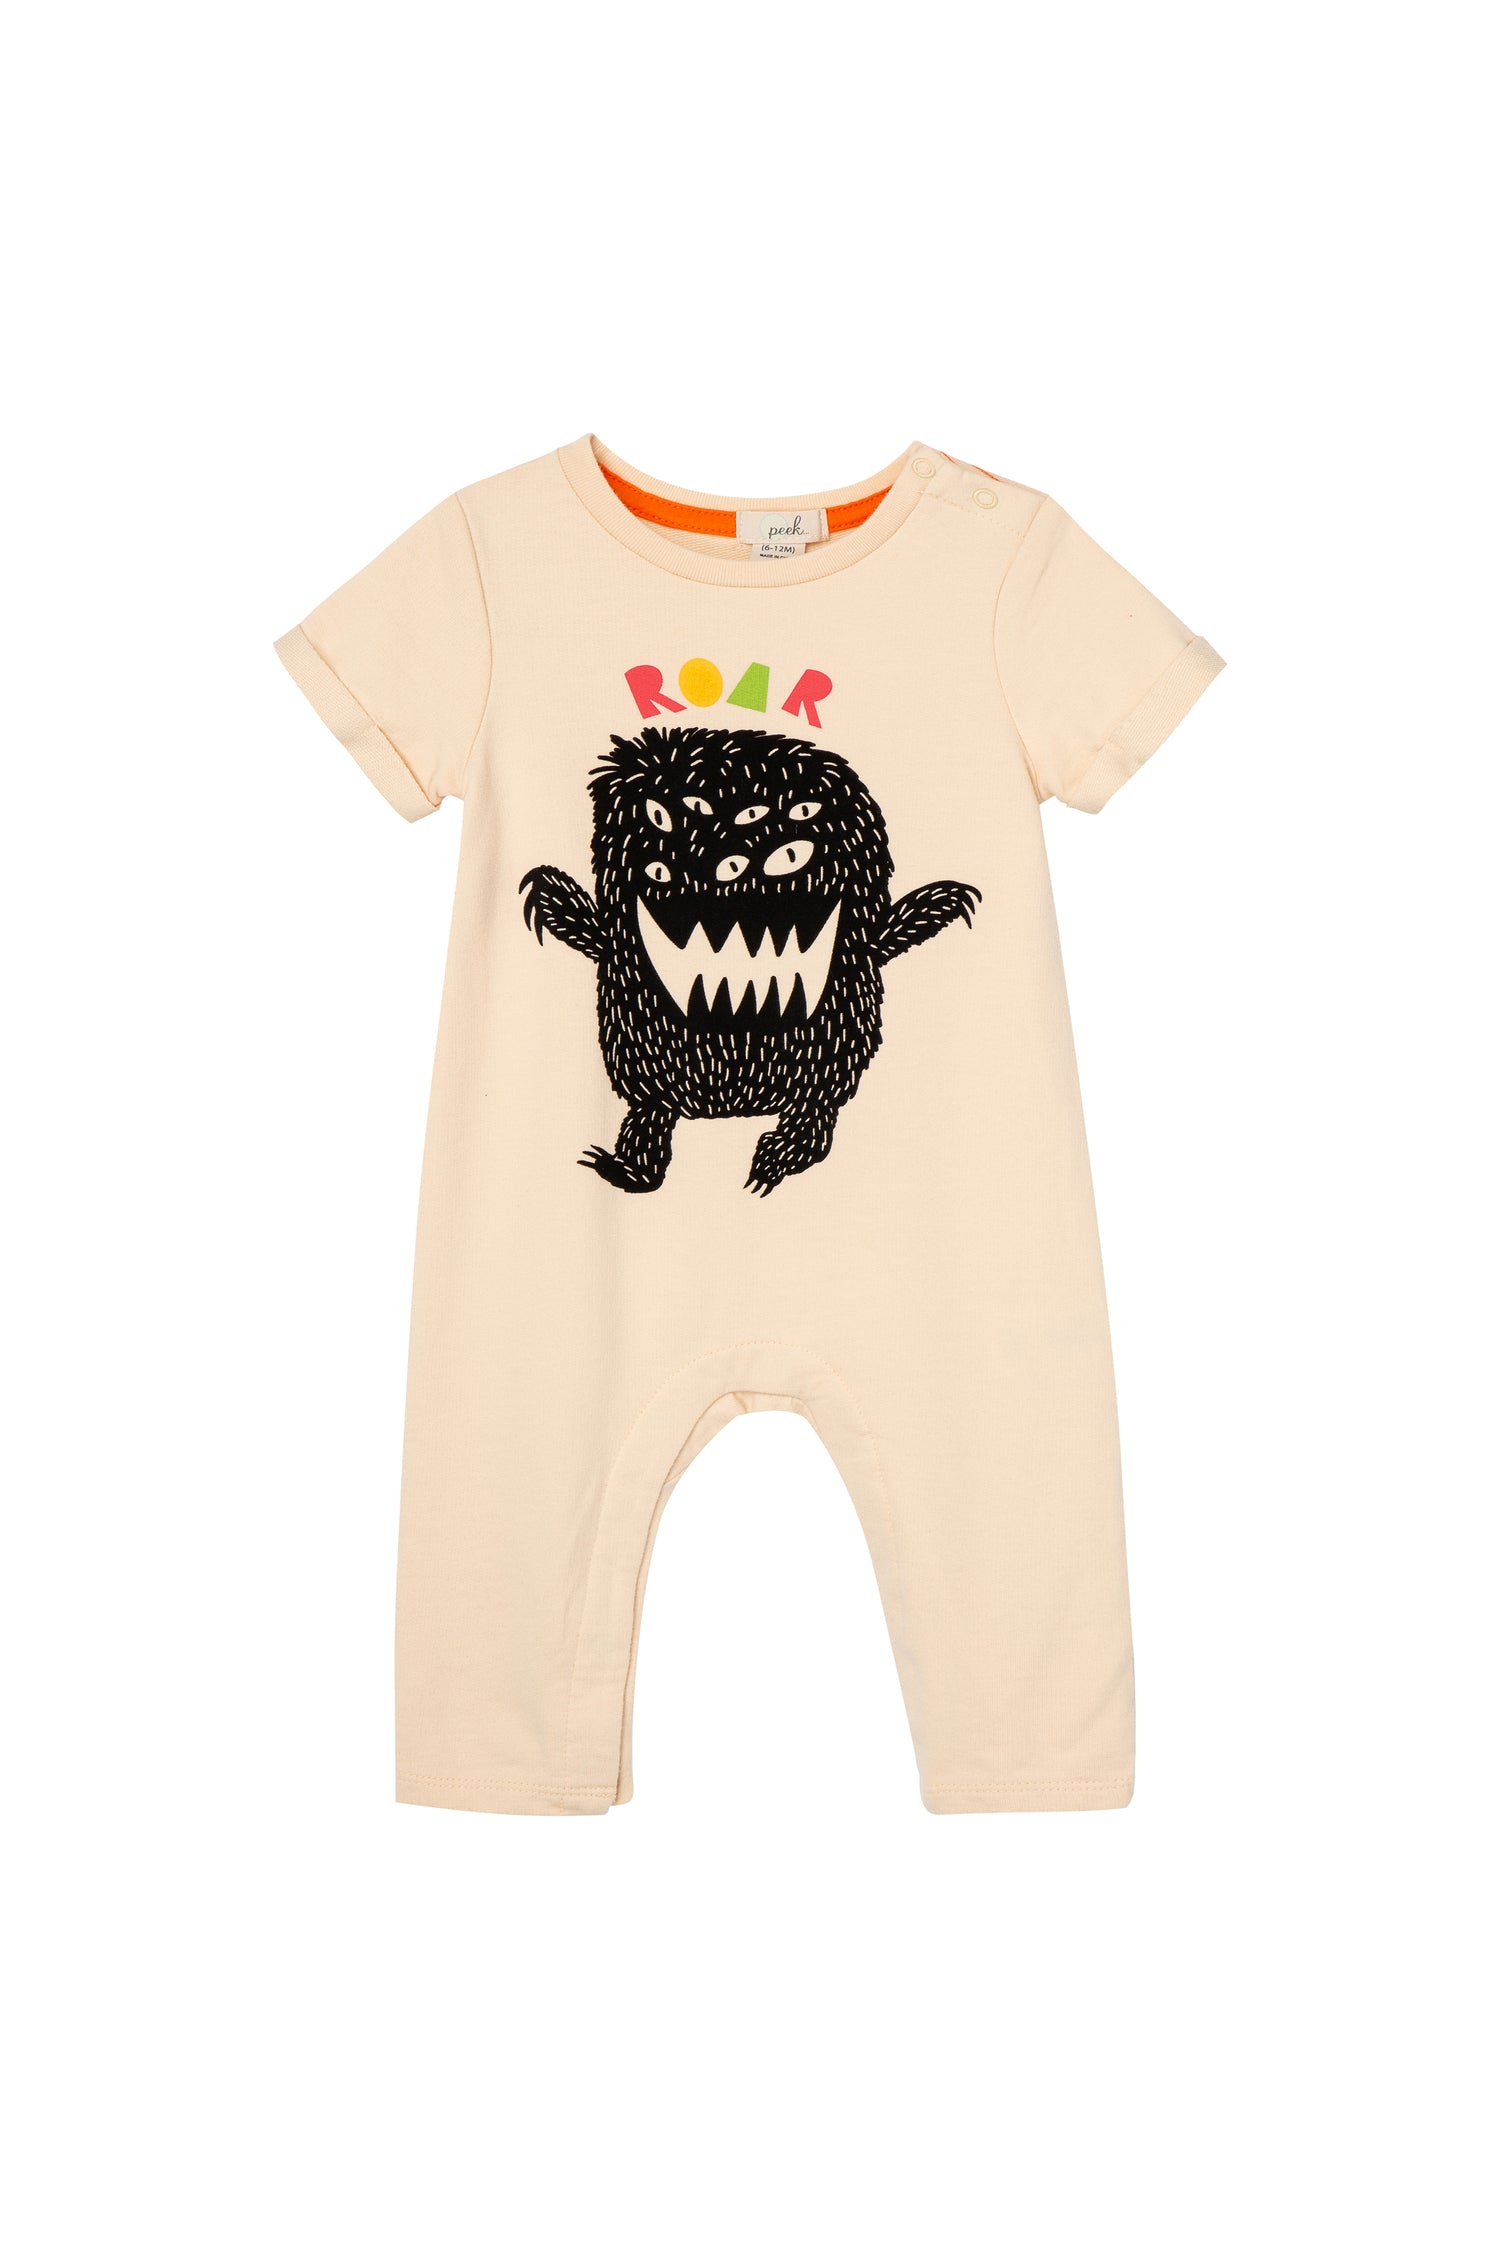 Peach romper with monster illustration and text 'Roar'